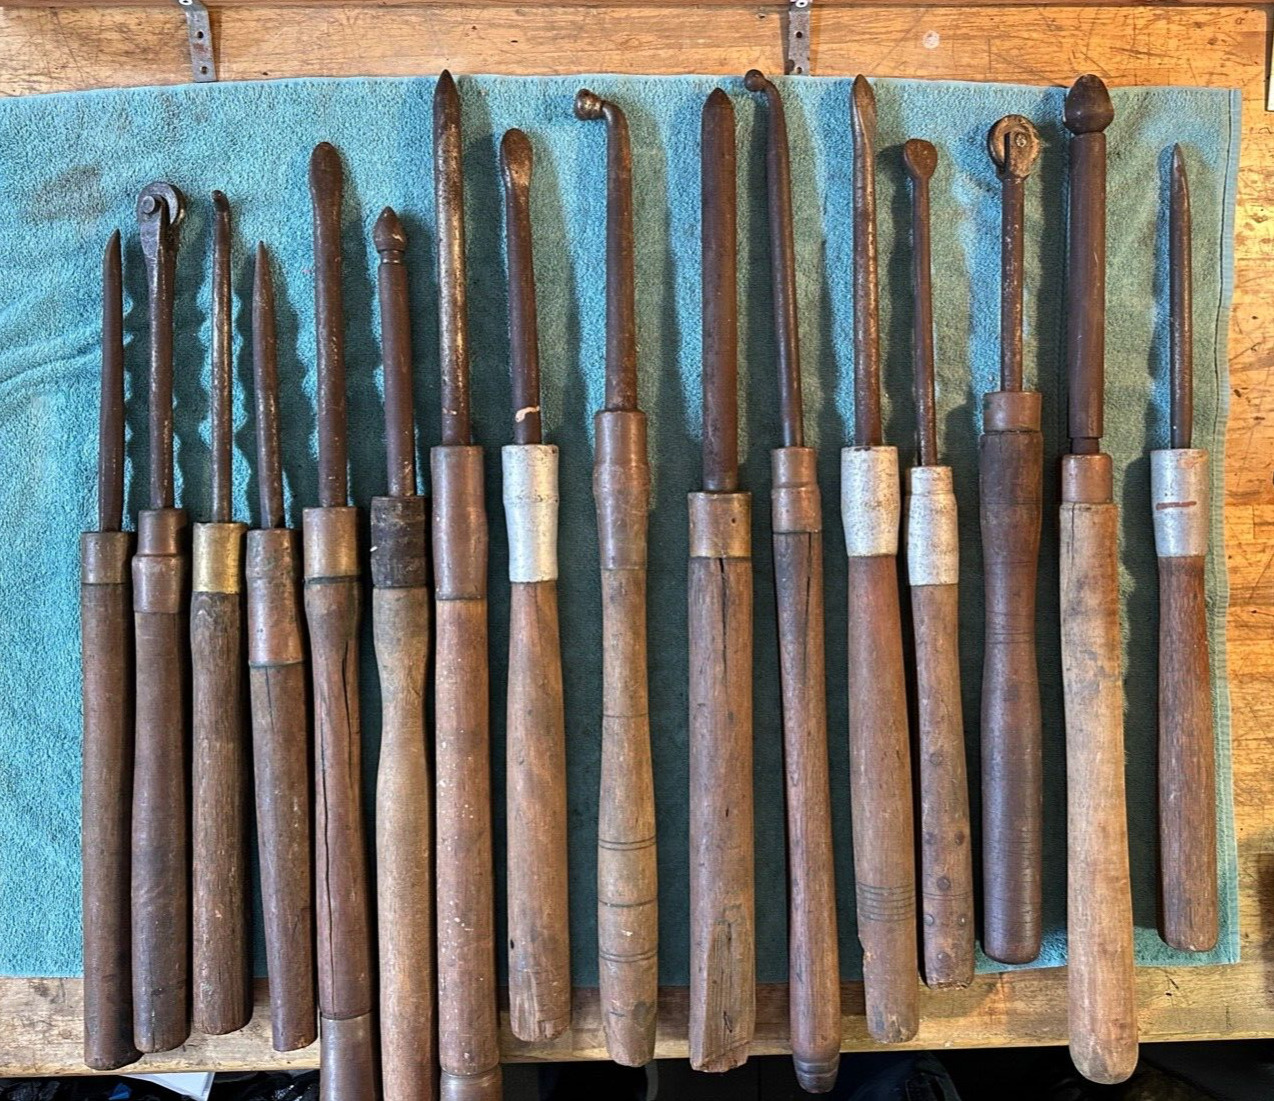 Lot of 16 Antique Primitive Metal Fabrication Wooden Handled Molding Tools Brass